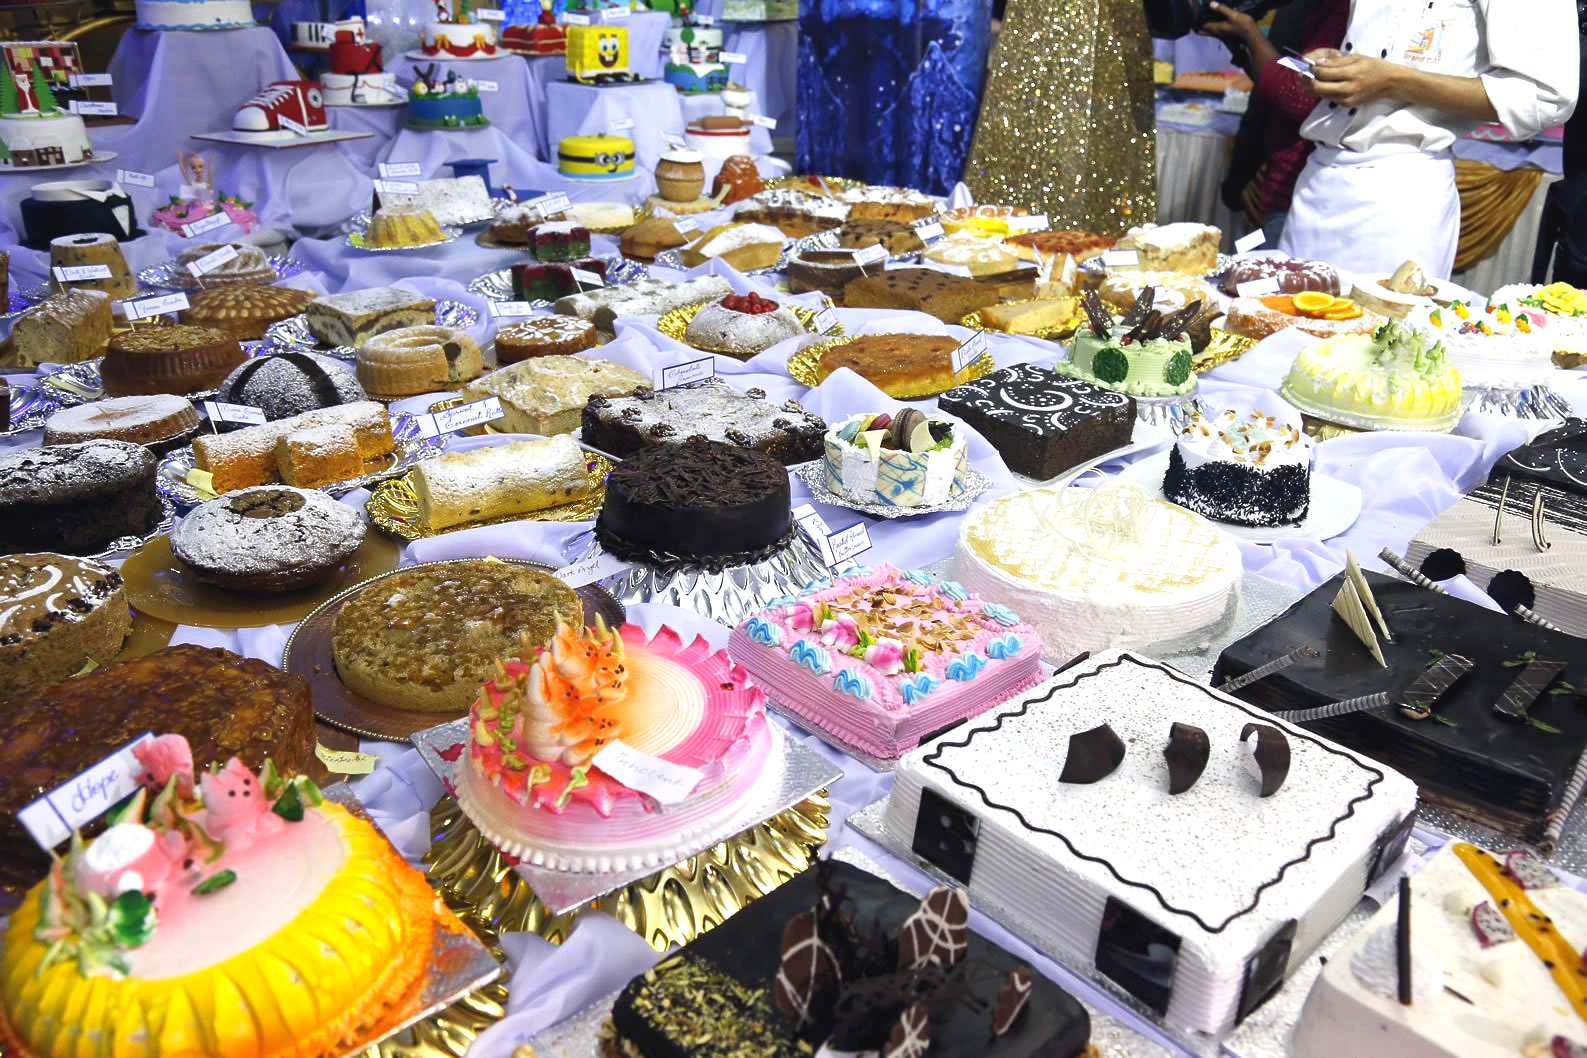 Most different cakes displayed: Culinary Academy Of India sets world record